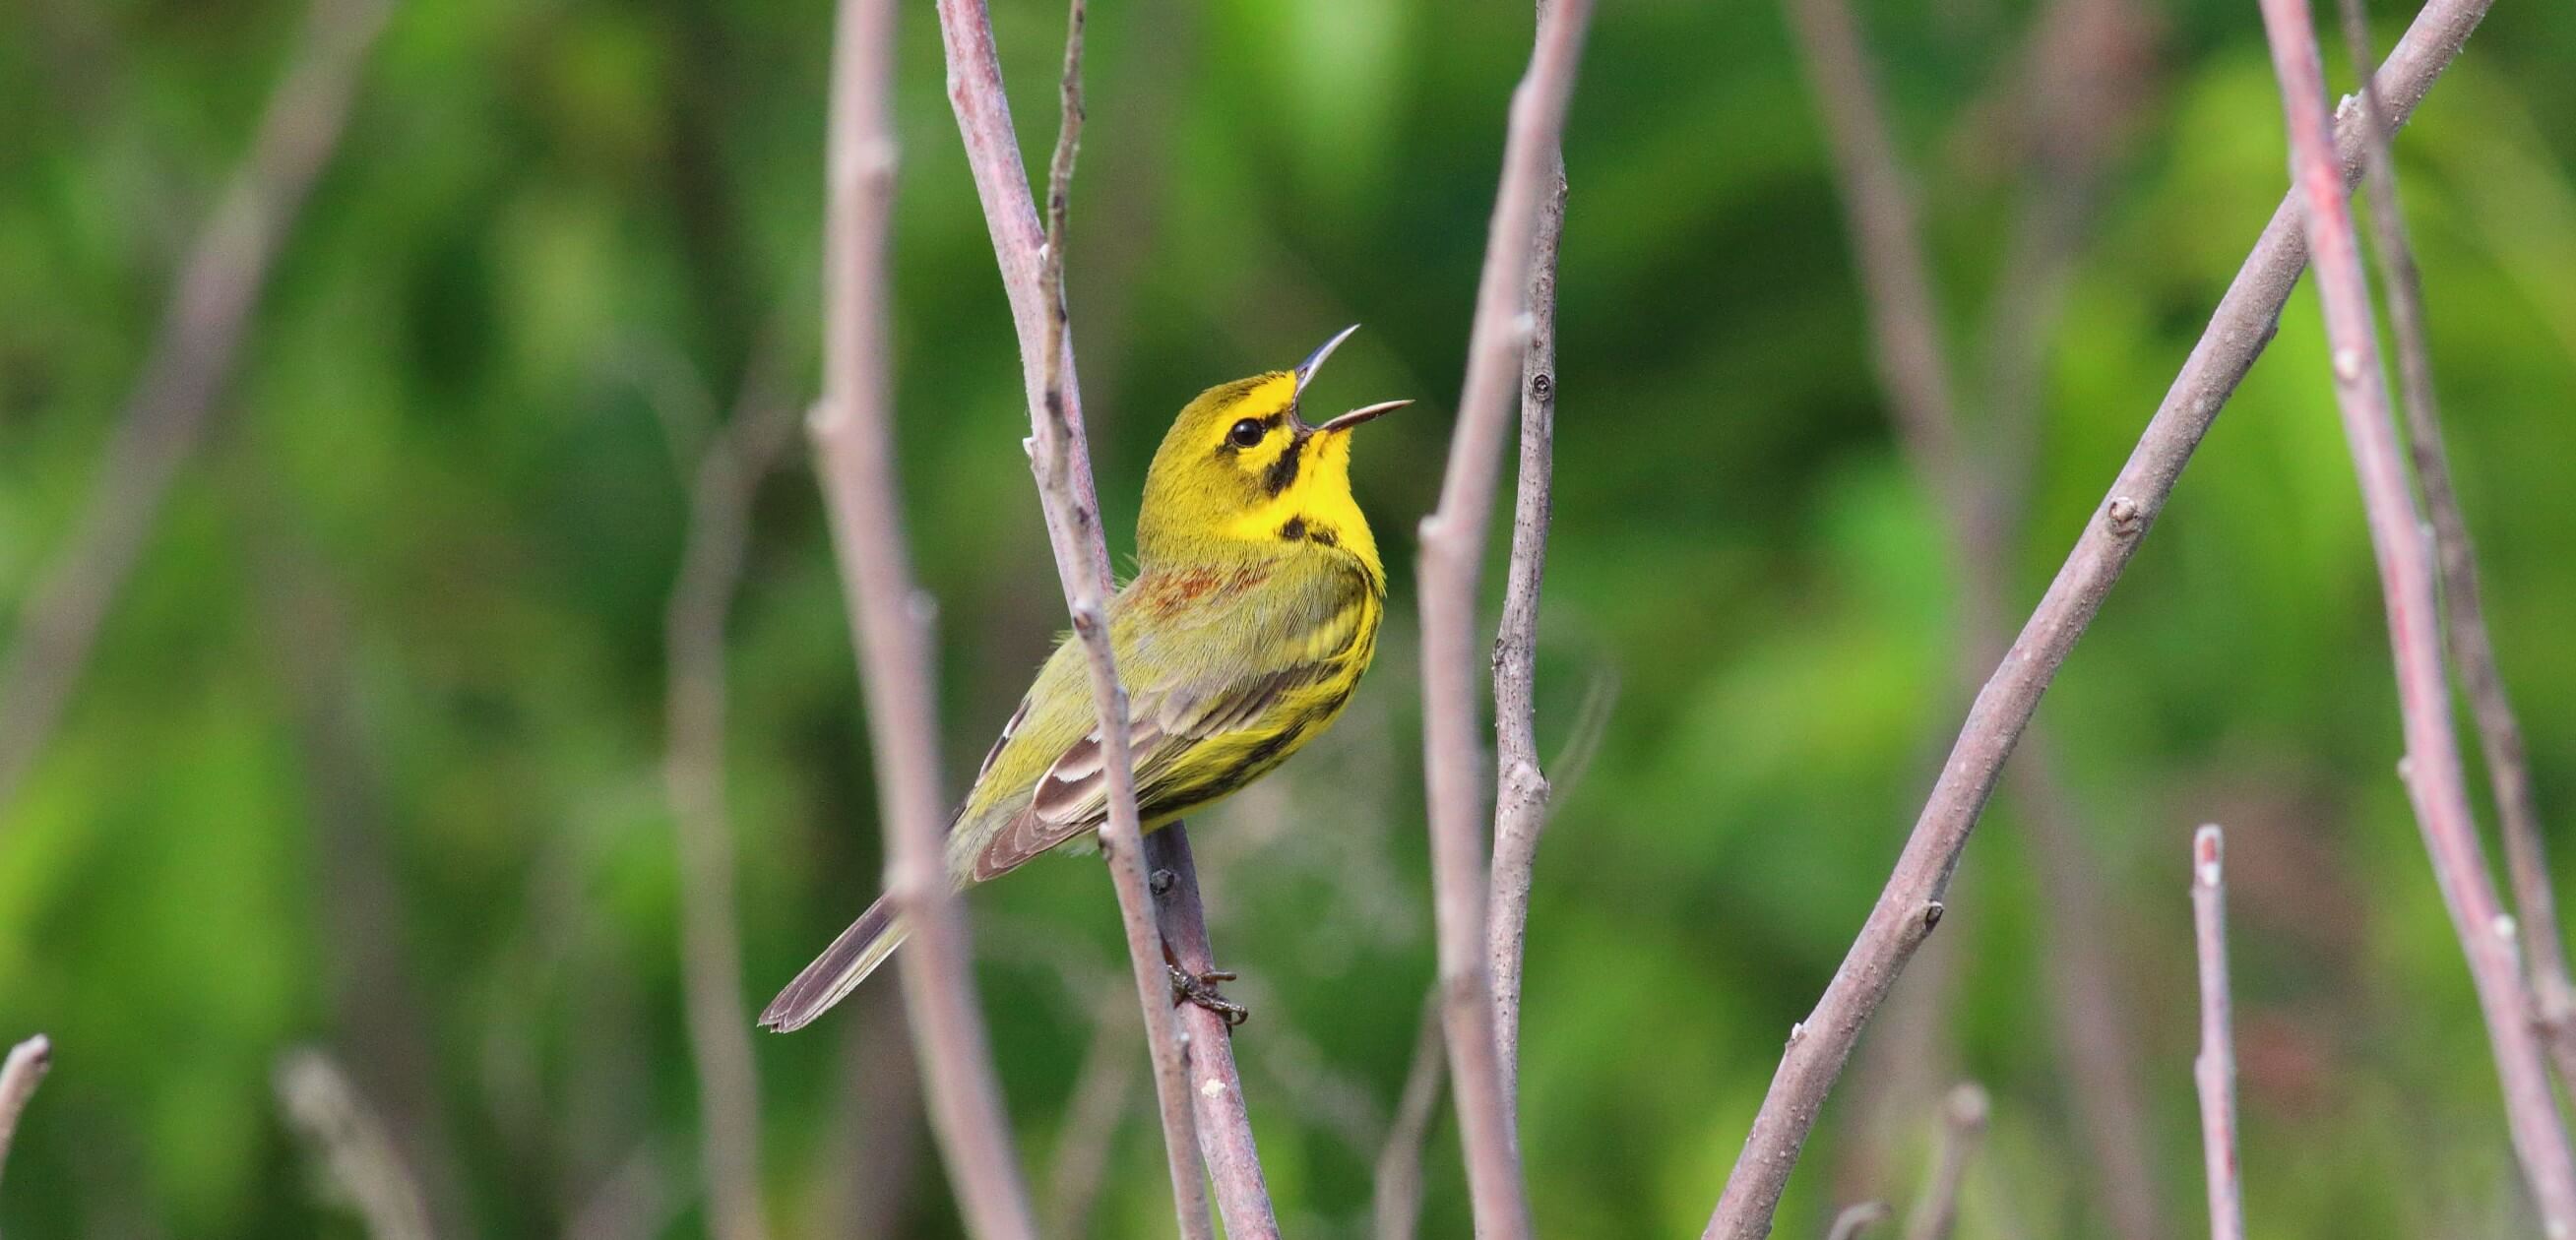  I quickly spotted this Prairie Warbler at Cane Ridge, in southern Missouri. Photo by Bruce Beehler